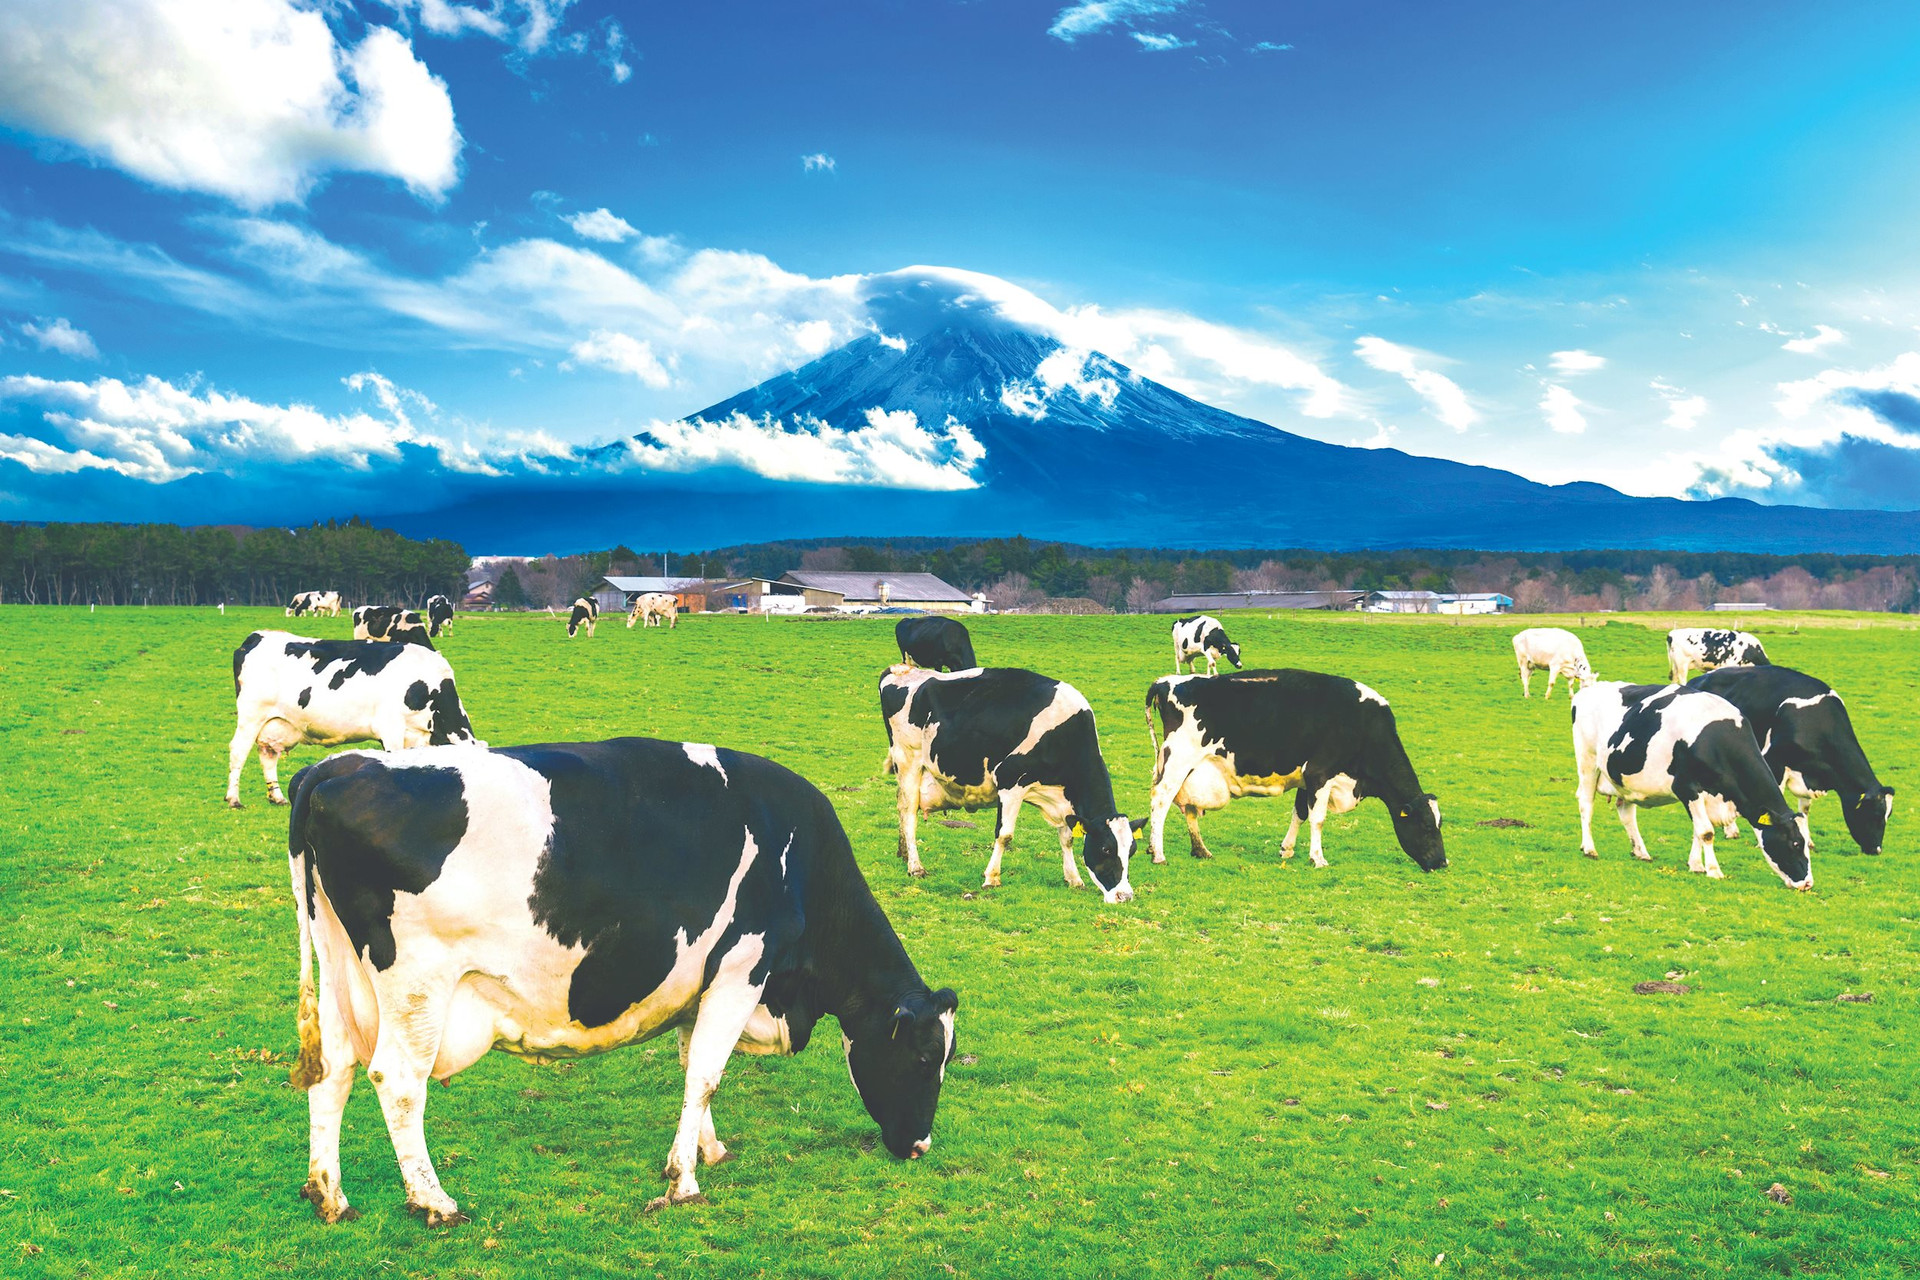 cows-eating-lush-grass-green-field-front-fuji-mountain-japan-compressed.jpeg